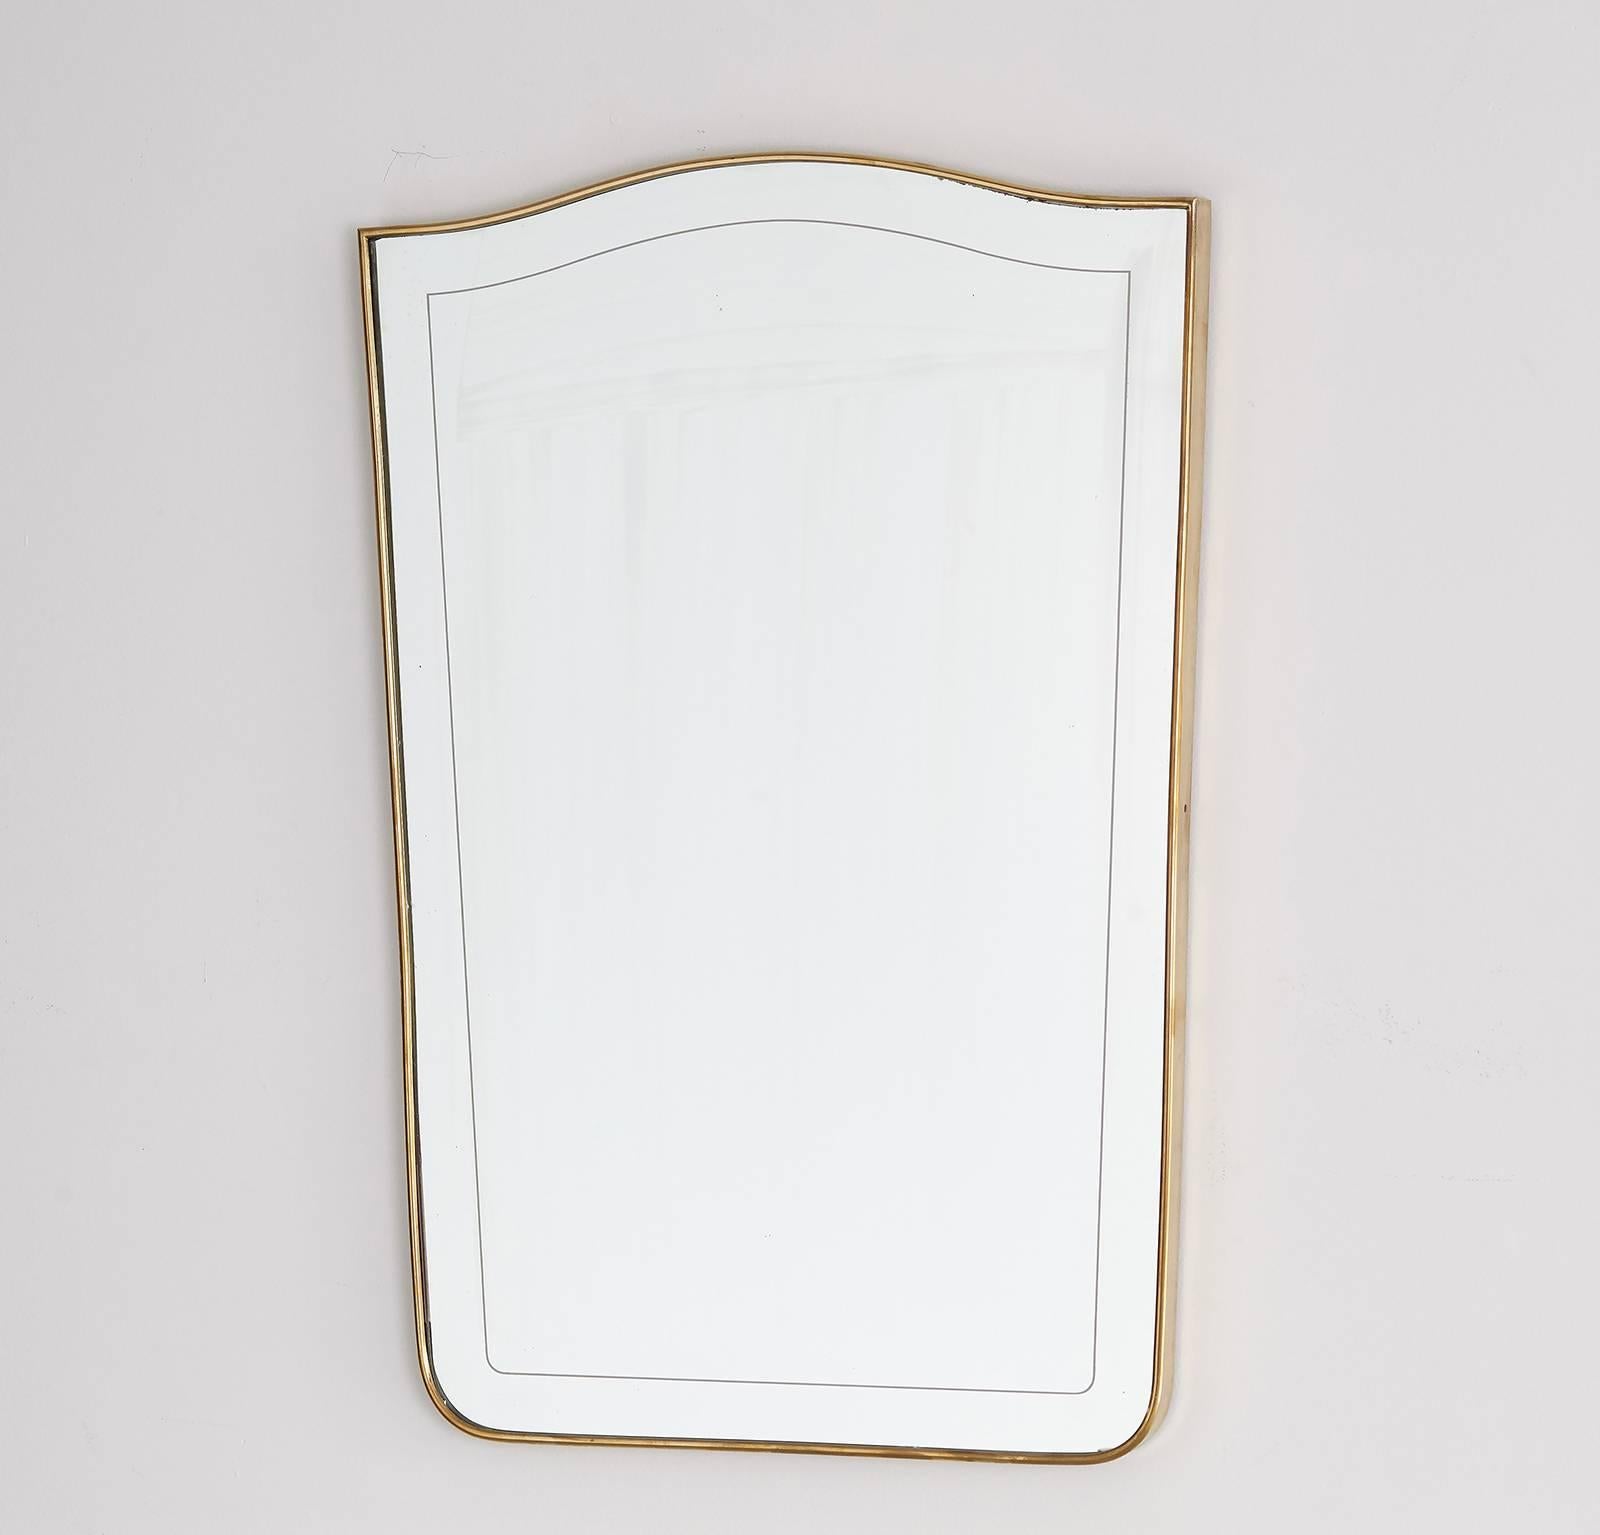 Gorgeous Italian brass mirror with elegant curves and subtle etching around perimeter of mirror. Perfect for a chic bathroom or entry.